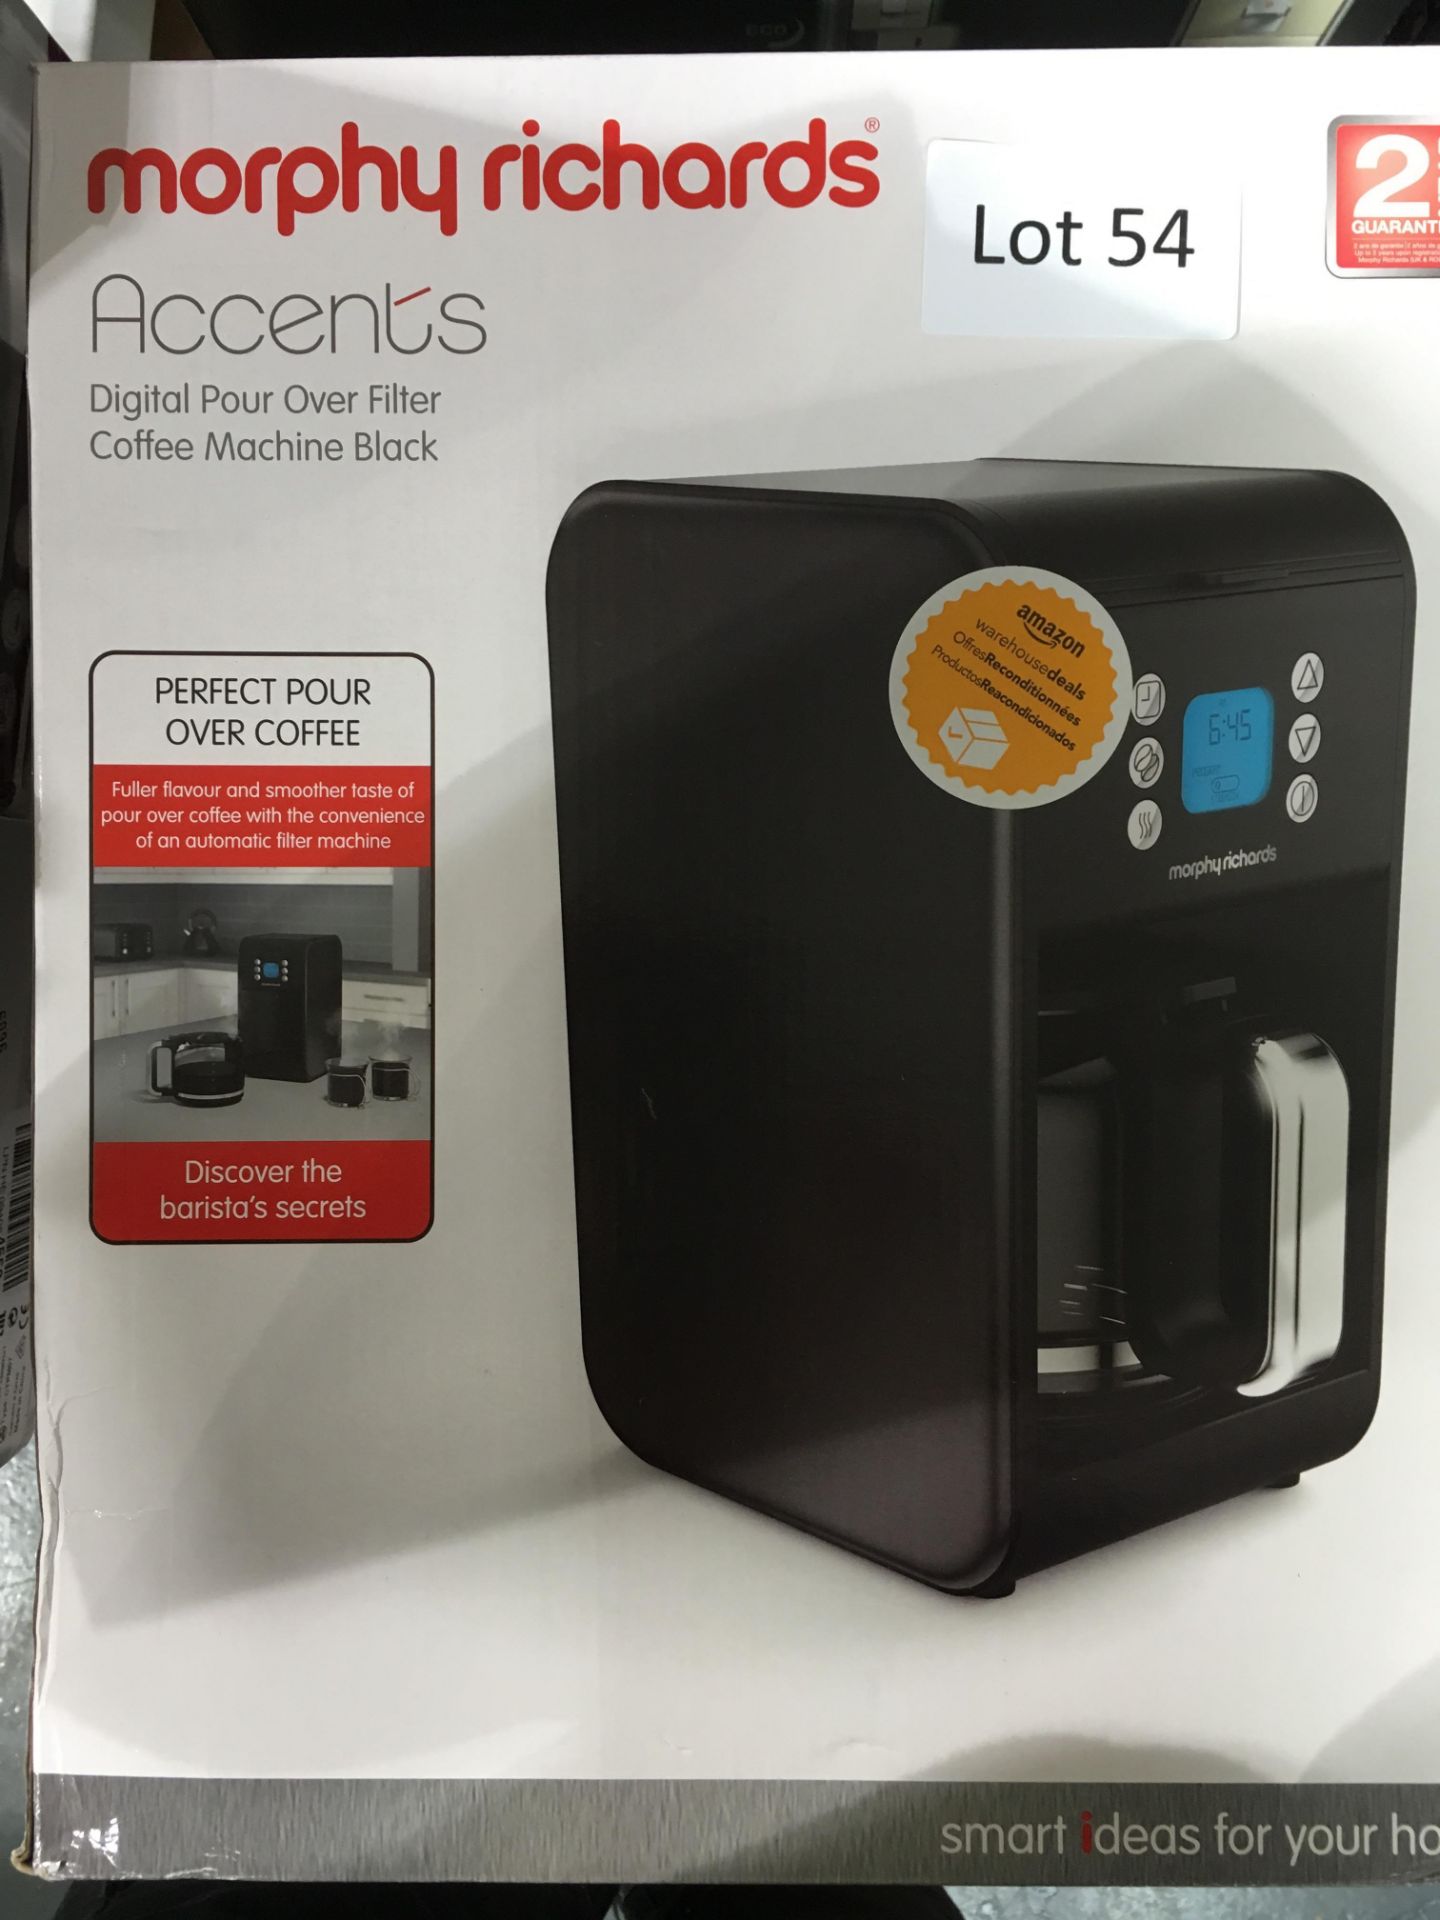 Morphy Richards Accents digital pour-over filter coffee machine in black. Working customer return.